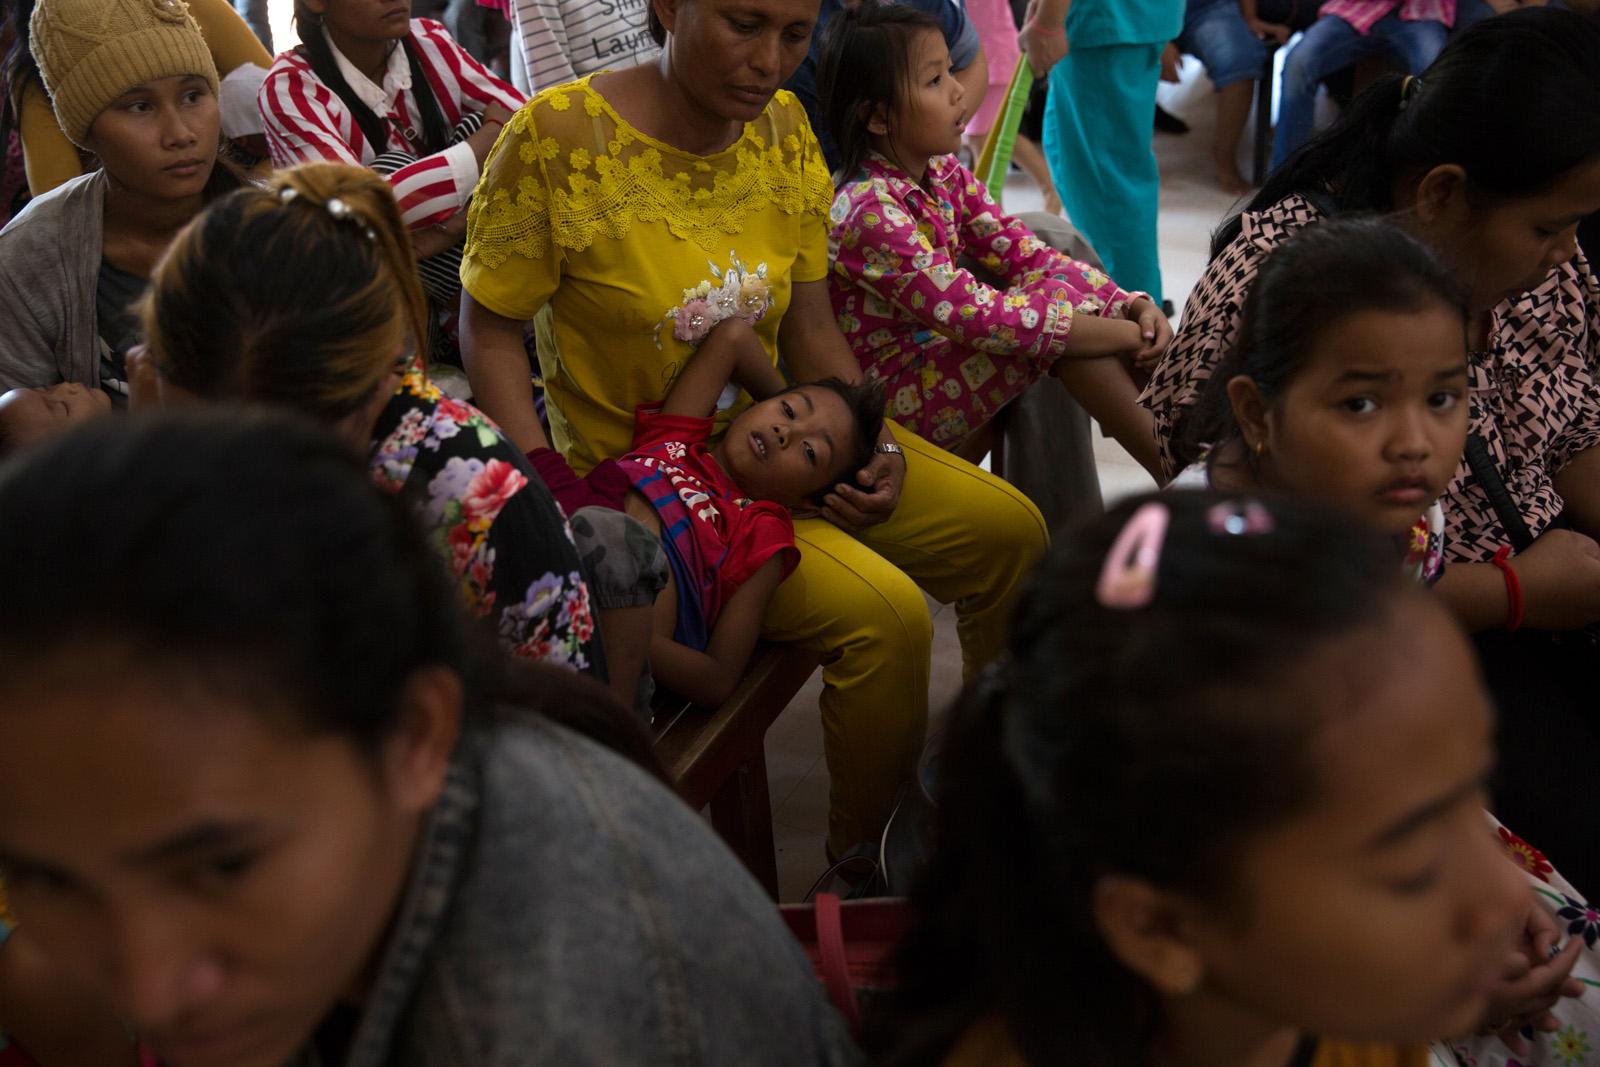 SOUTHEAST ASIA'S DENGUE EPIDEMIC - Mother Simdaly, 42, and her son Boreach, 6, wait to see...